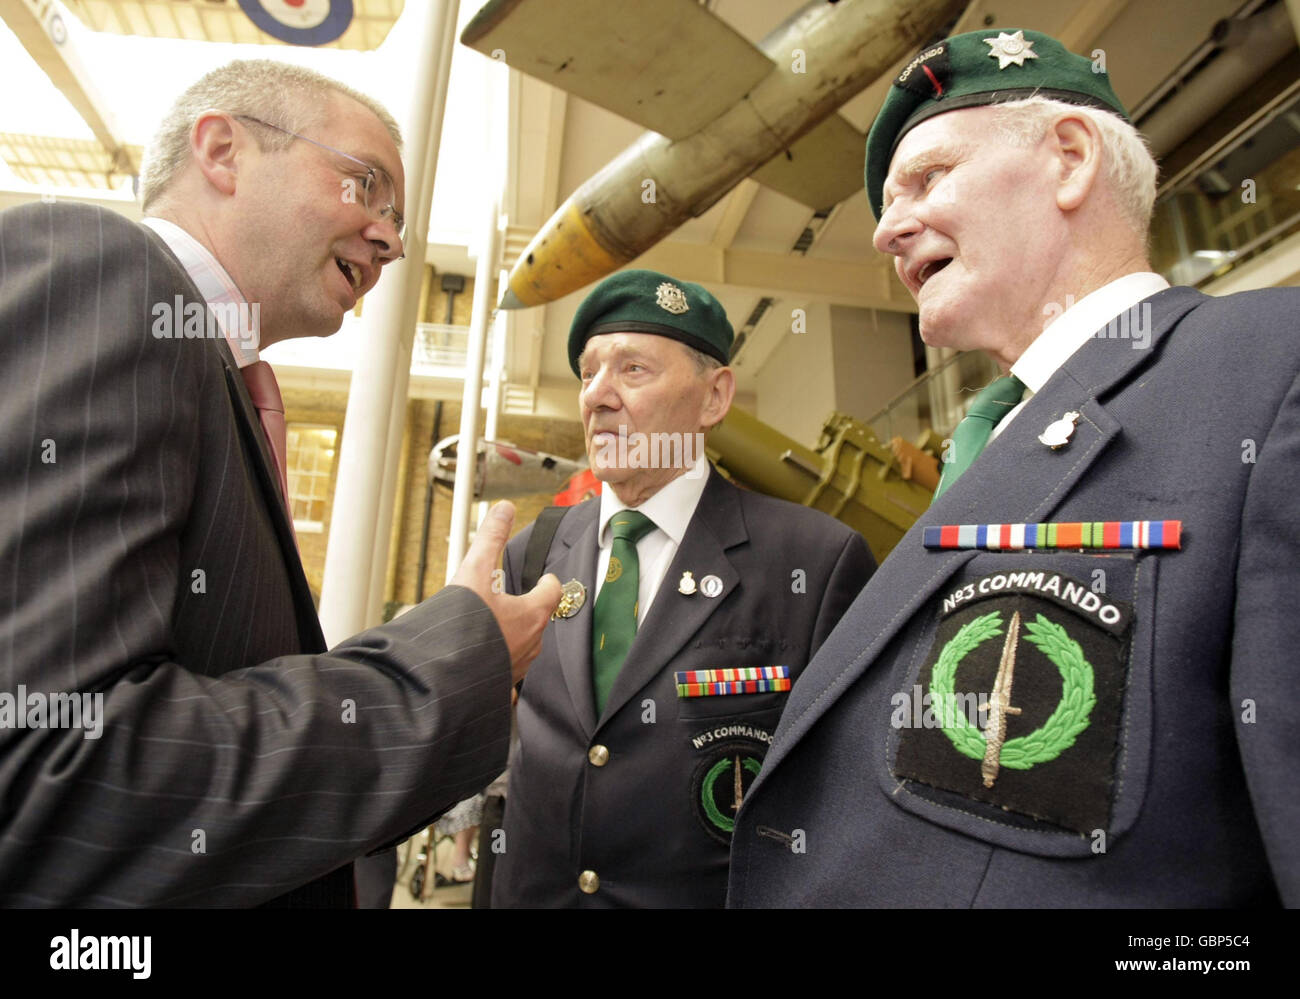 Peter Wanless (left), CEO of the Big Lottery Fund, talks with WWII veterans Fred Walker (centre) and Jim Clinton, both of No3 Commando, at The Imperial War Museum, London, as they announced that they are to return to the scene of the D-Day landings. Stock Photo